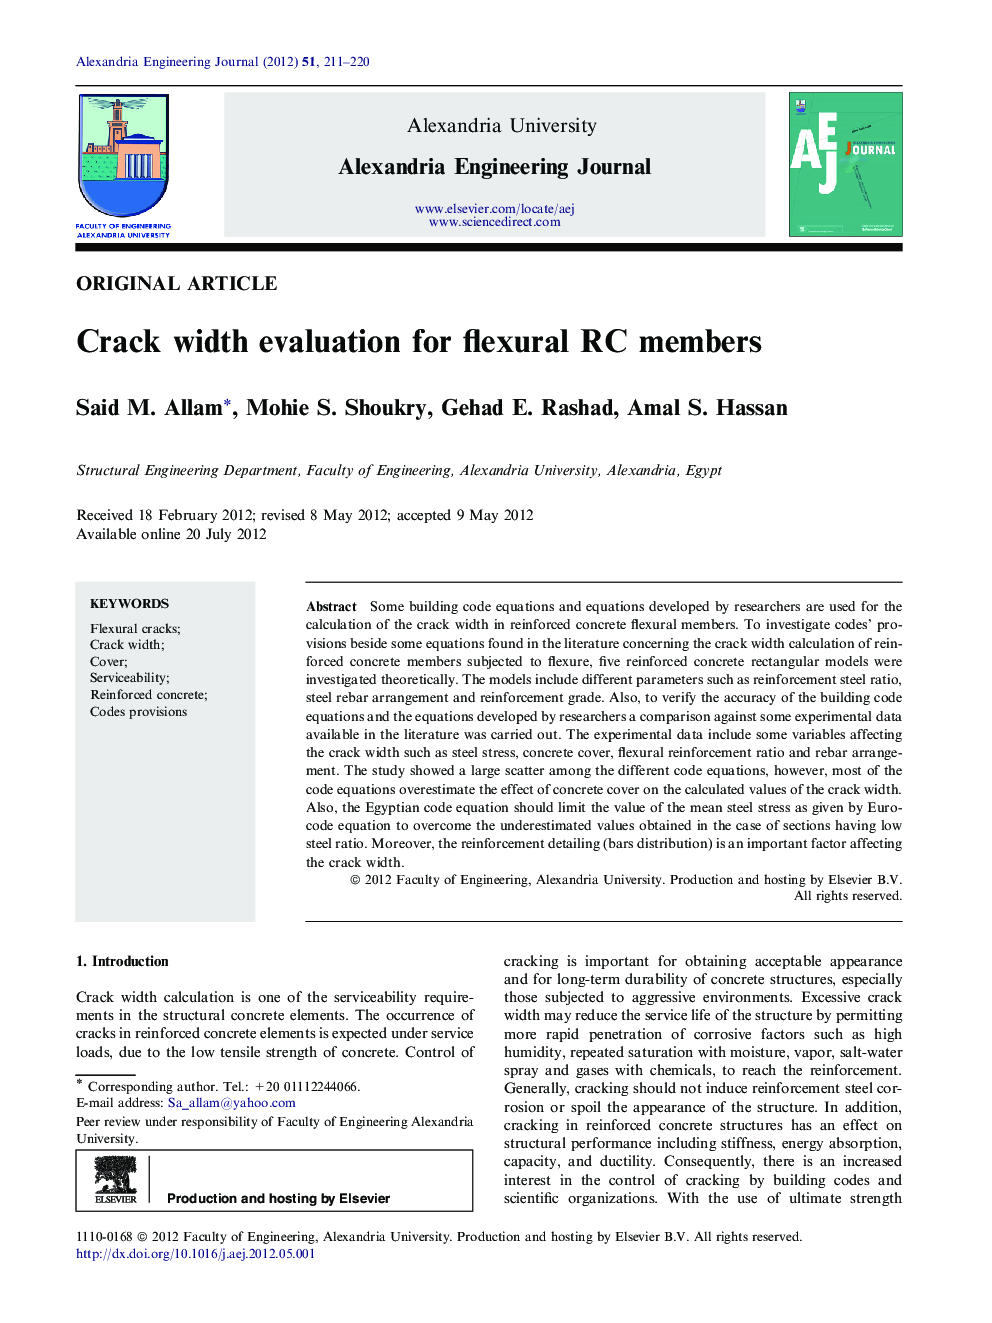 Crack width evaluation for flexural RC members 